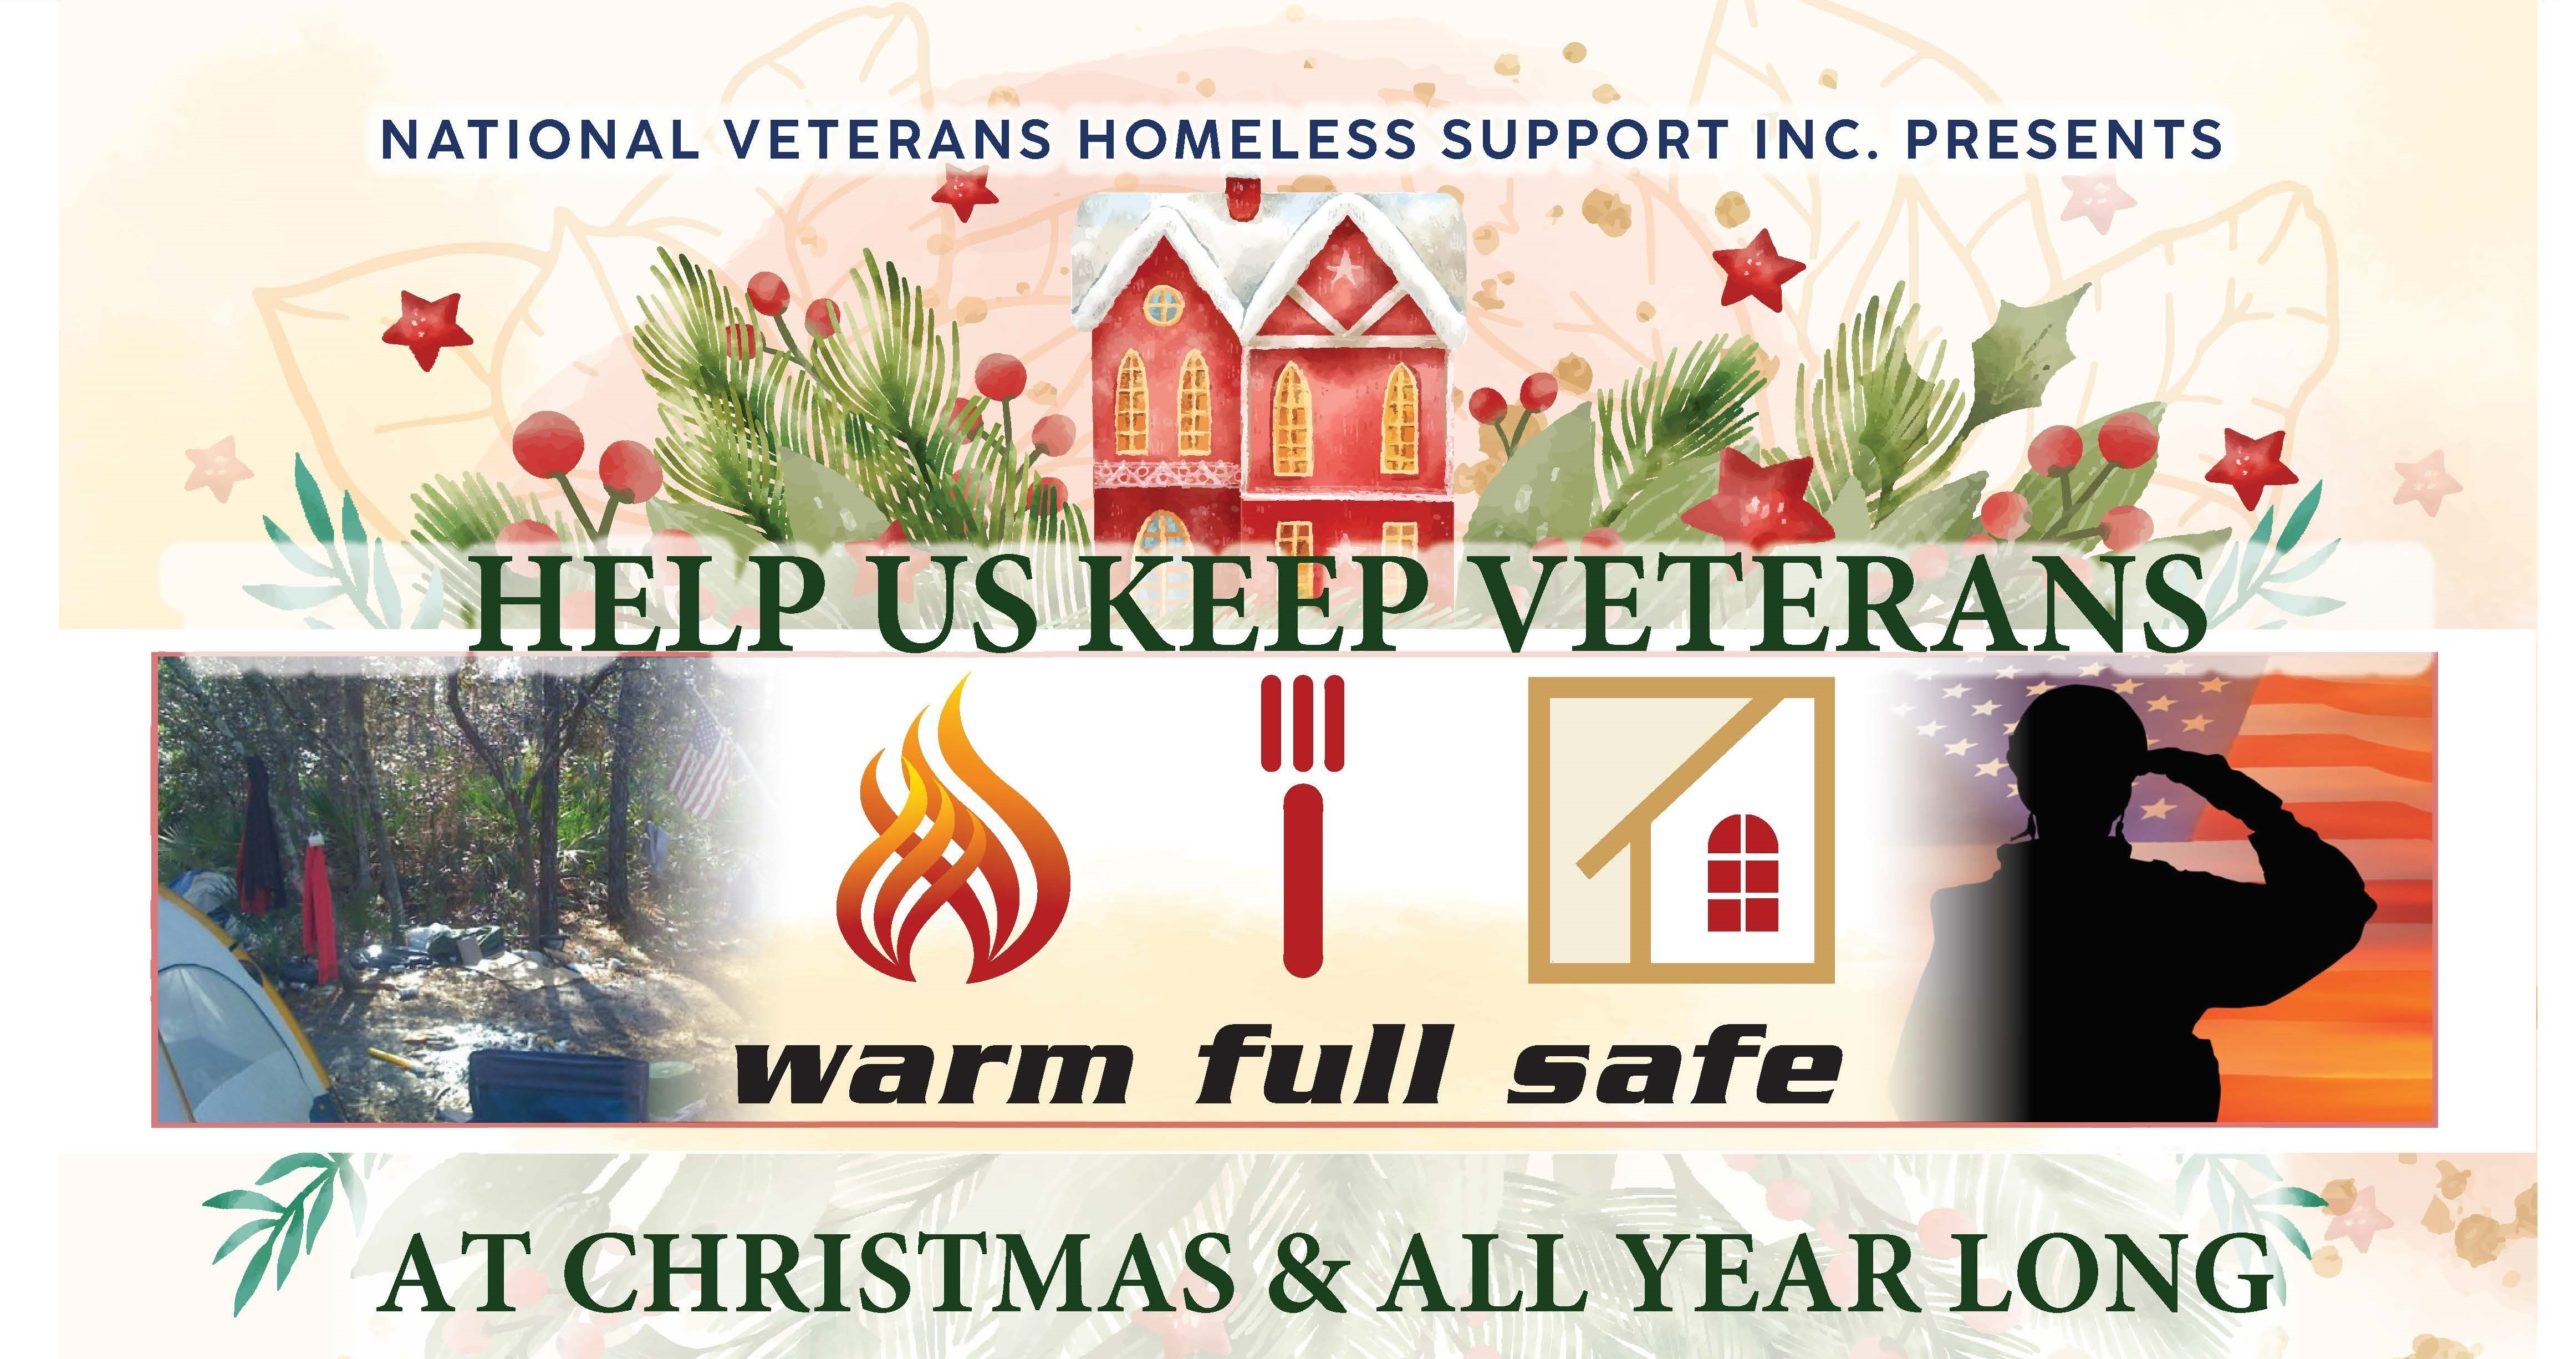 Keep veterans warm, full, and safe for the holidays!